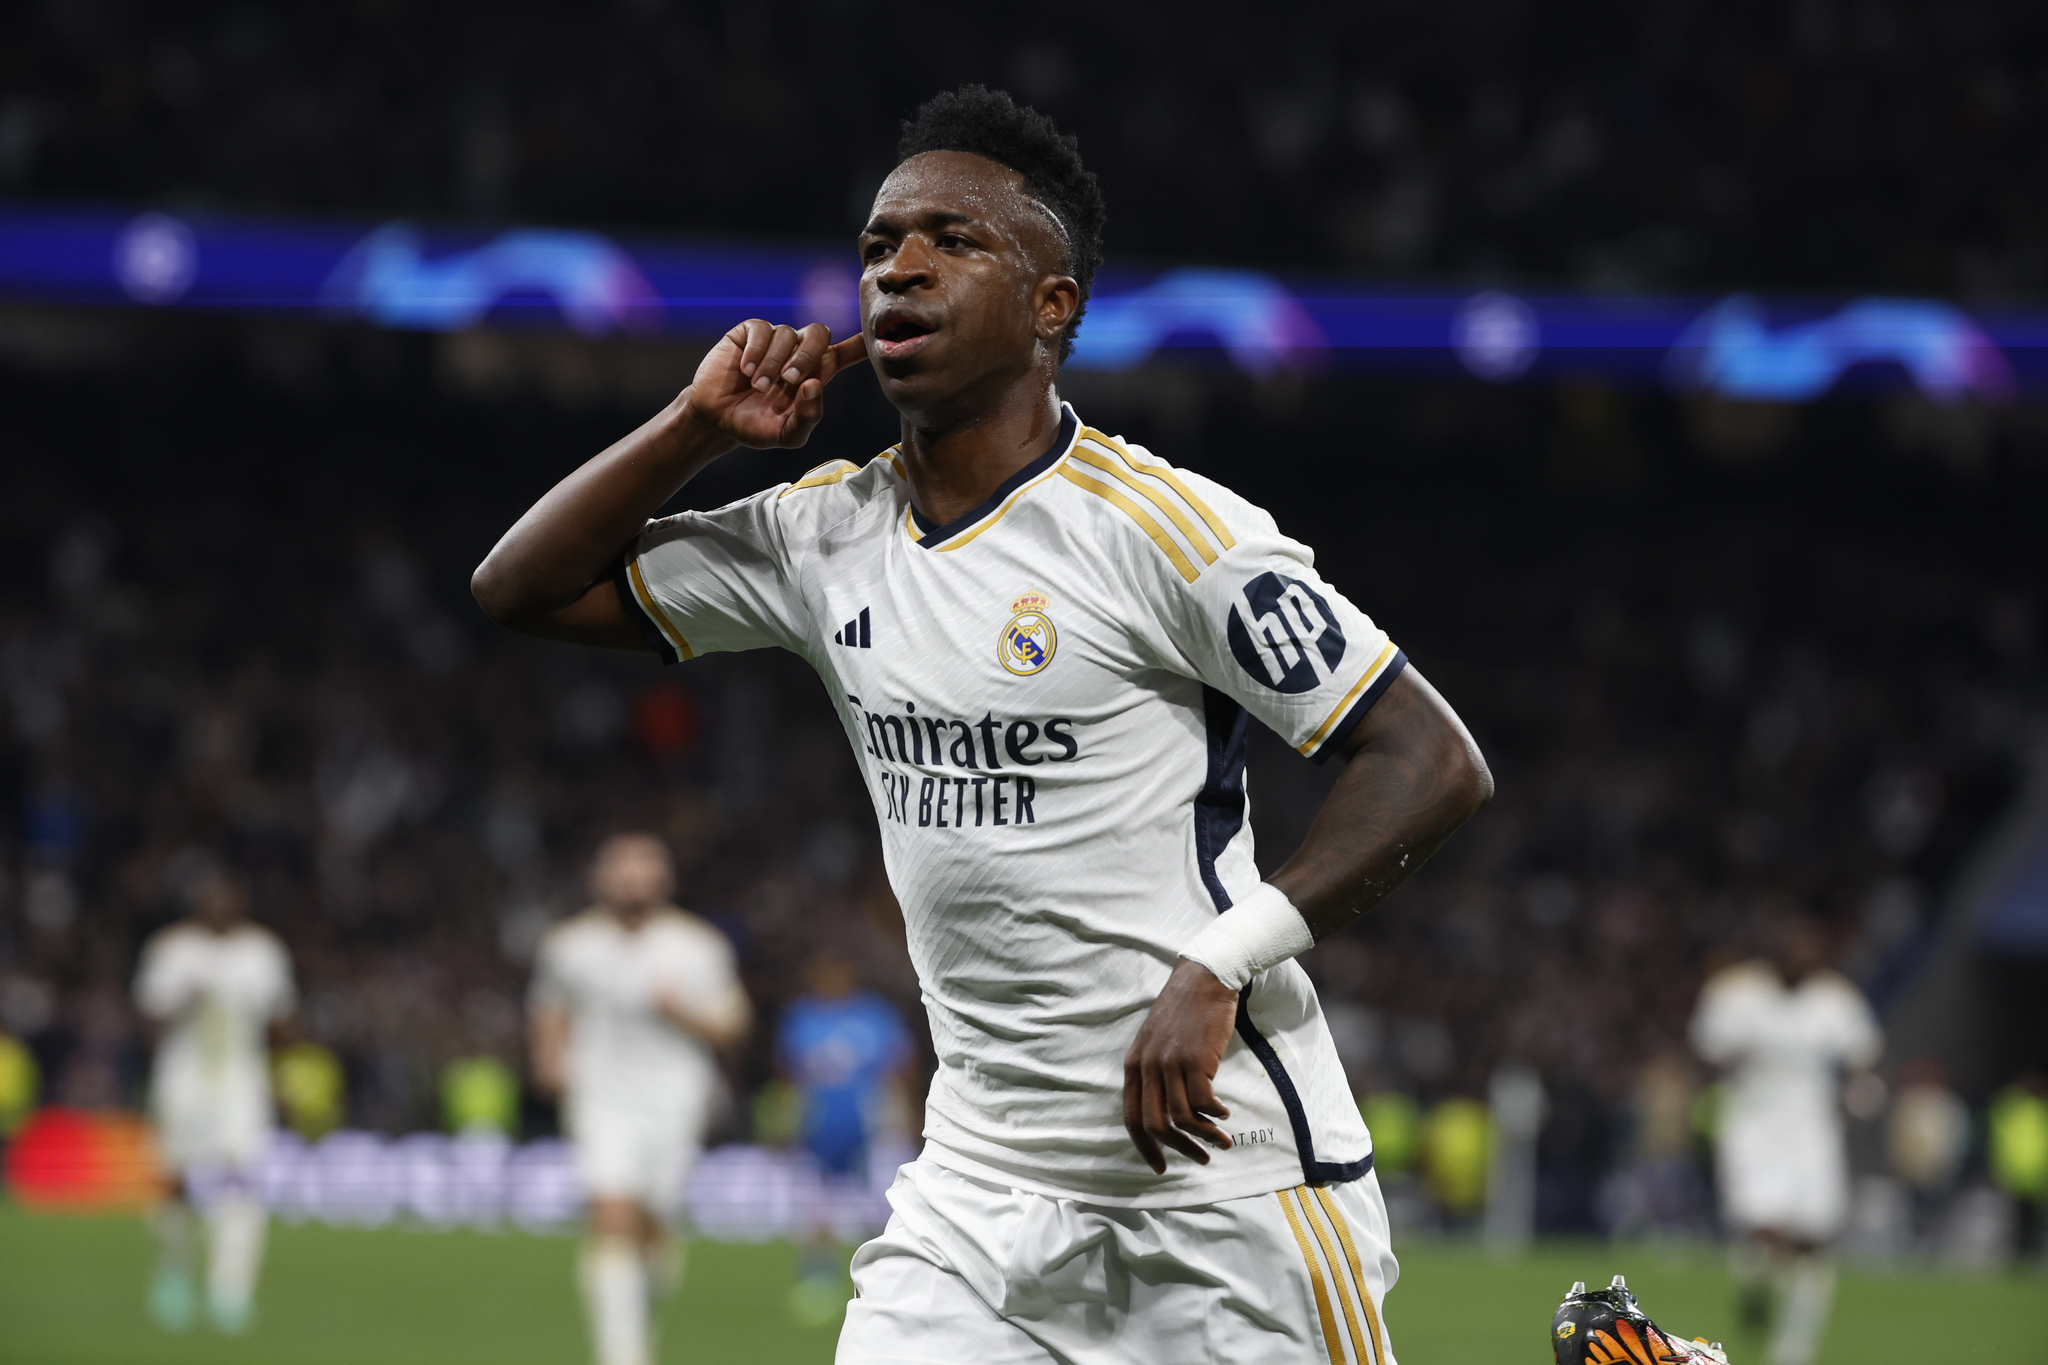 Vinicius celebrating his opening goal for Real Madrid